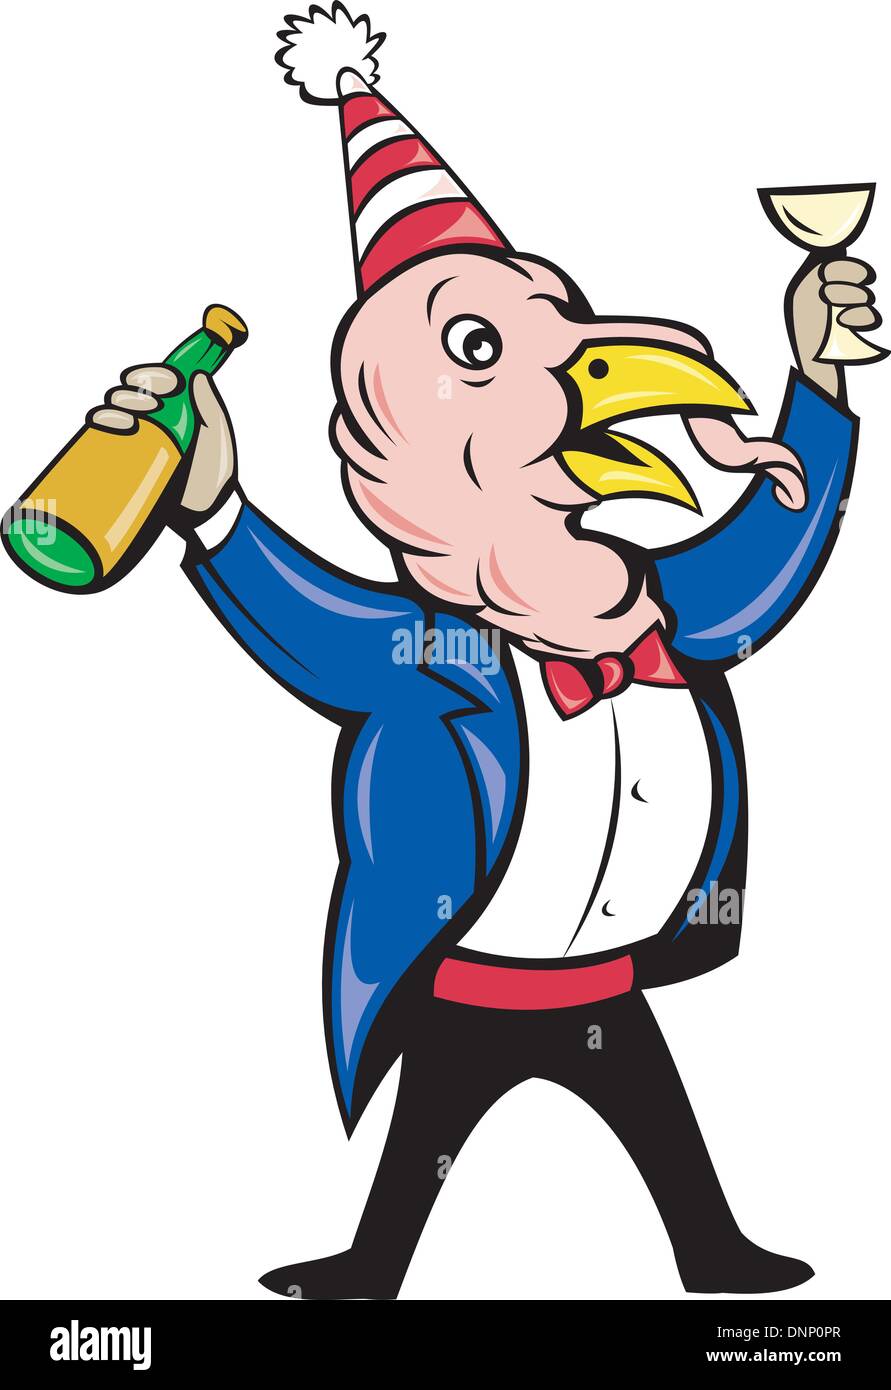 illustration of a cartoon turkey in tie and suit holding wine bottle and glass offering a  toast isolated on white Stock Vector